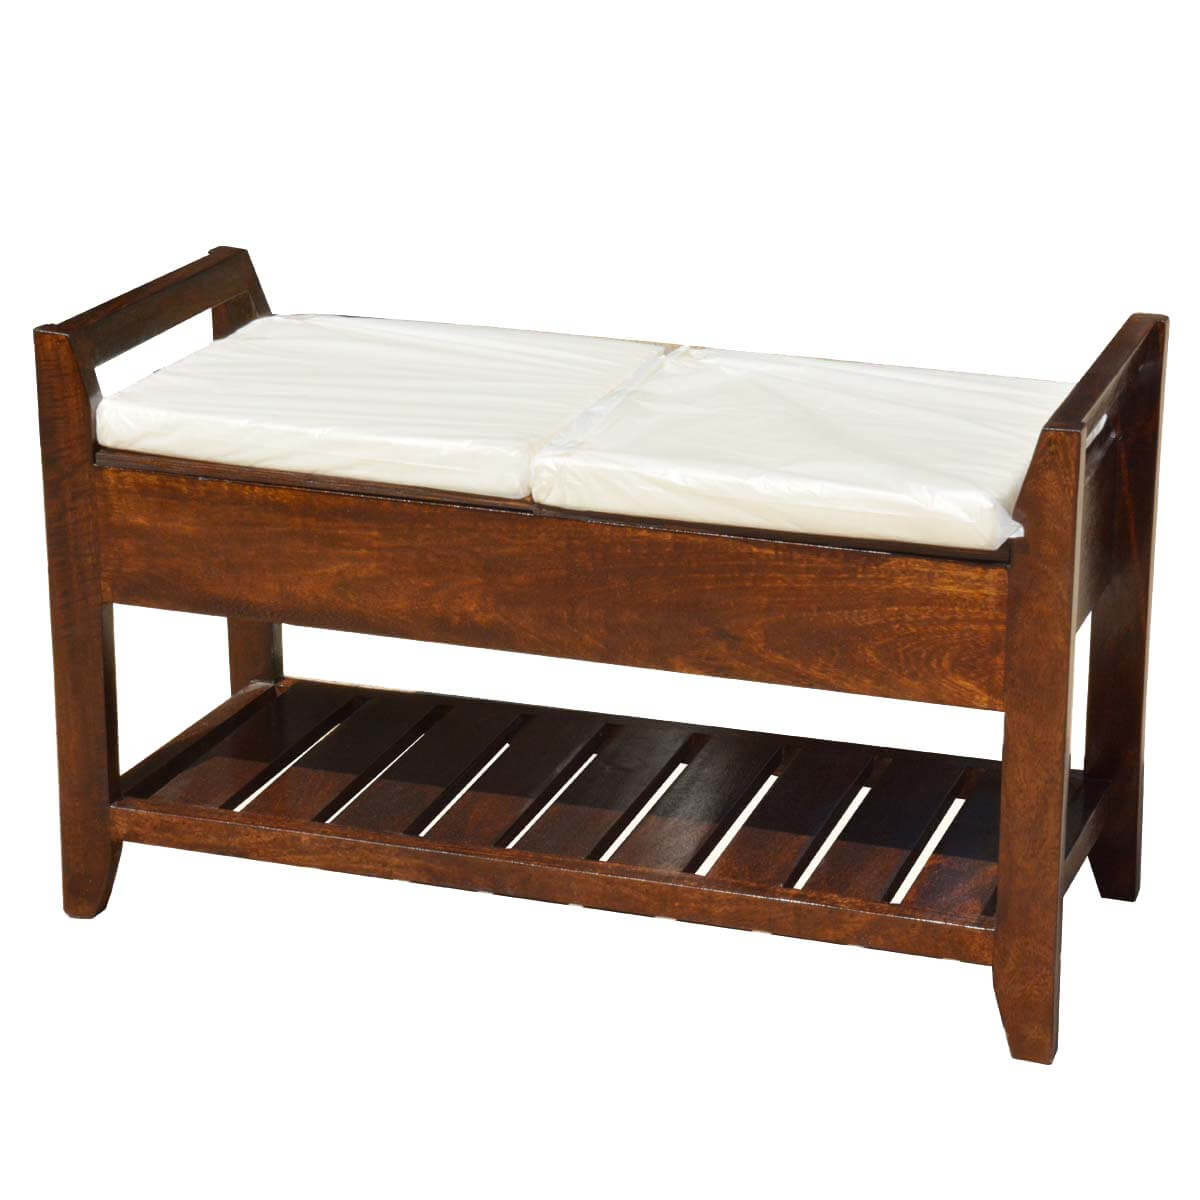 https://www.sierralivingconcepts.com/images/thumbs/0392056_rustic-mission-mango-wood-cushioned-storage-bench-w-bottom-rack.jpeg